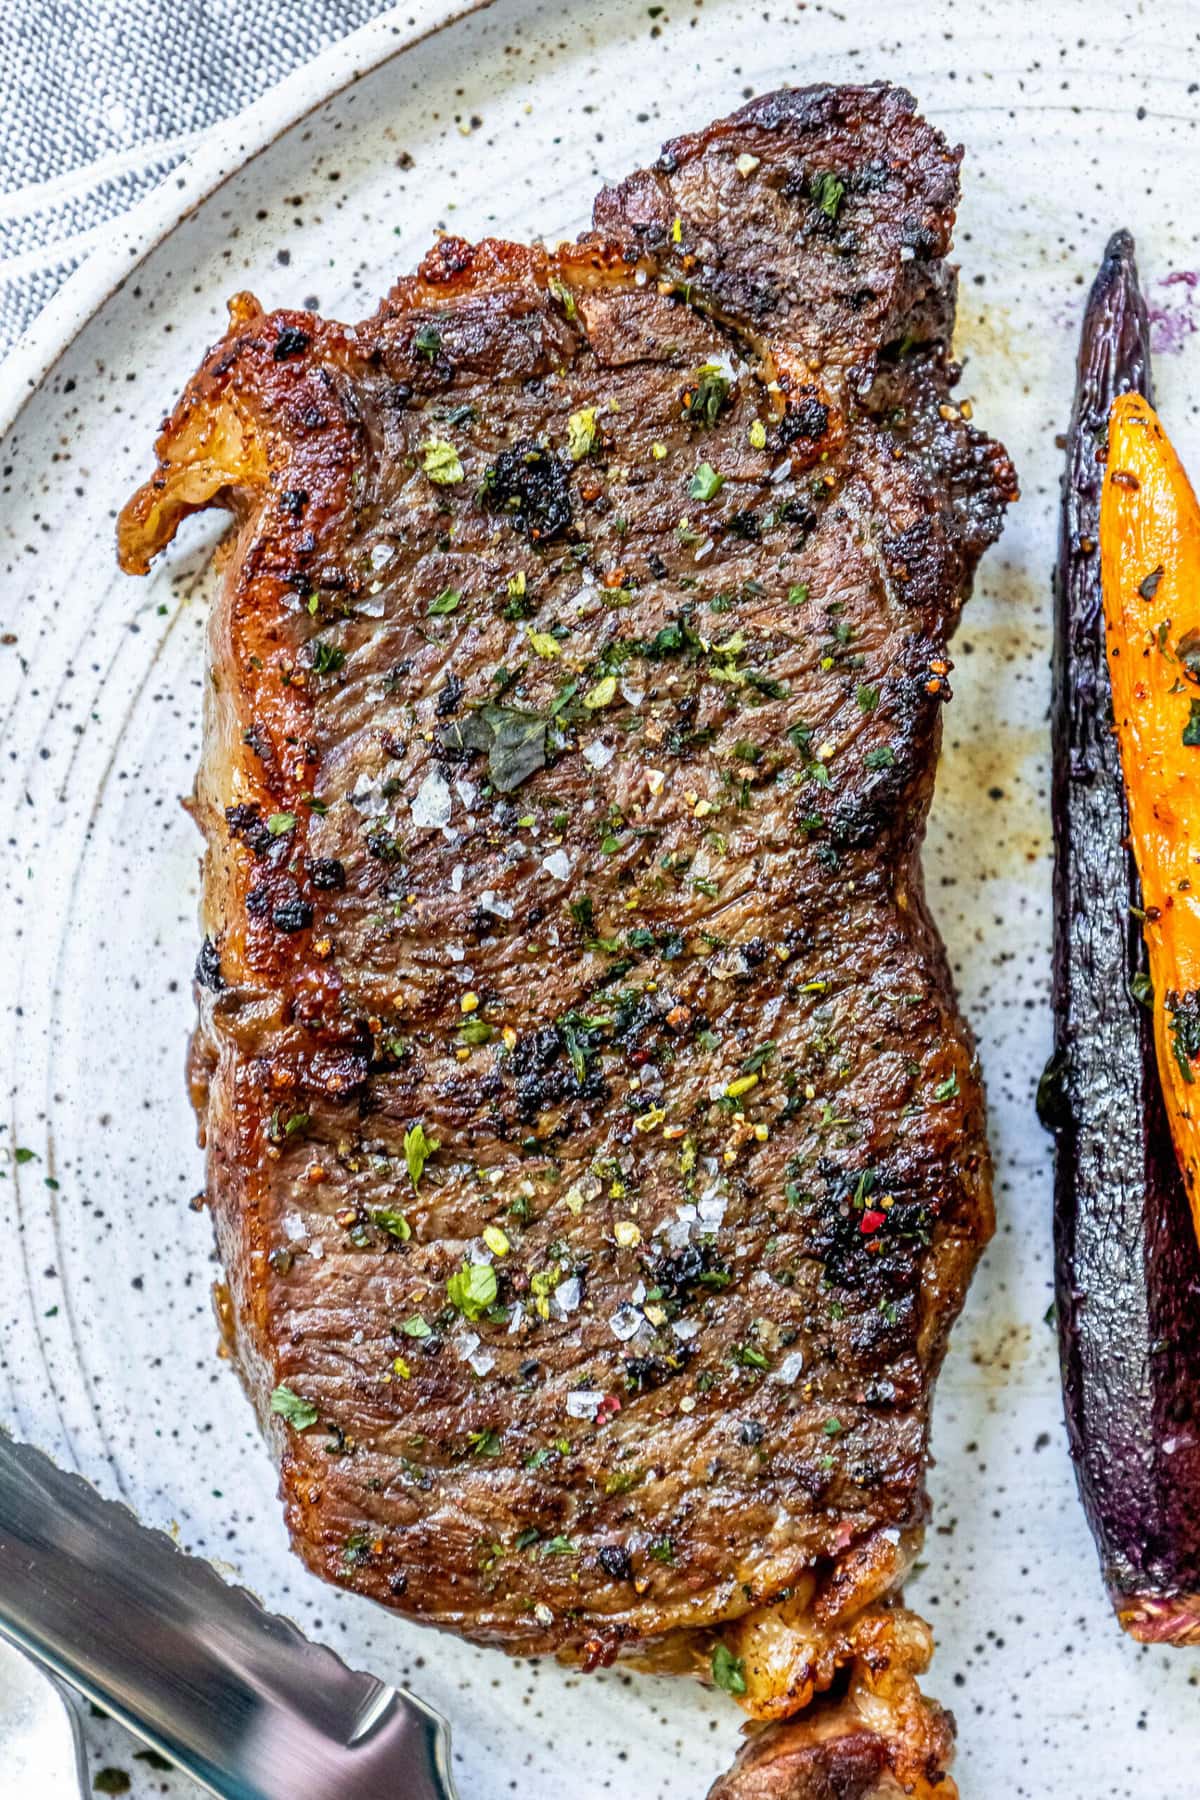 picture of a grilled steak seasoned with salt, pepper, and herbs on a plate